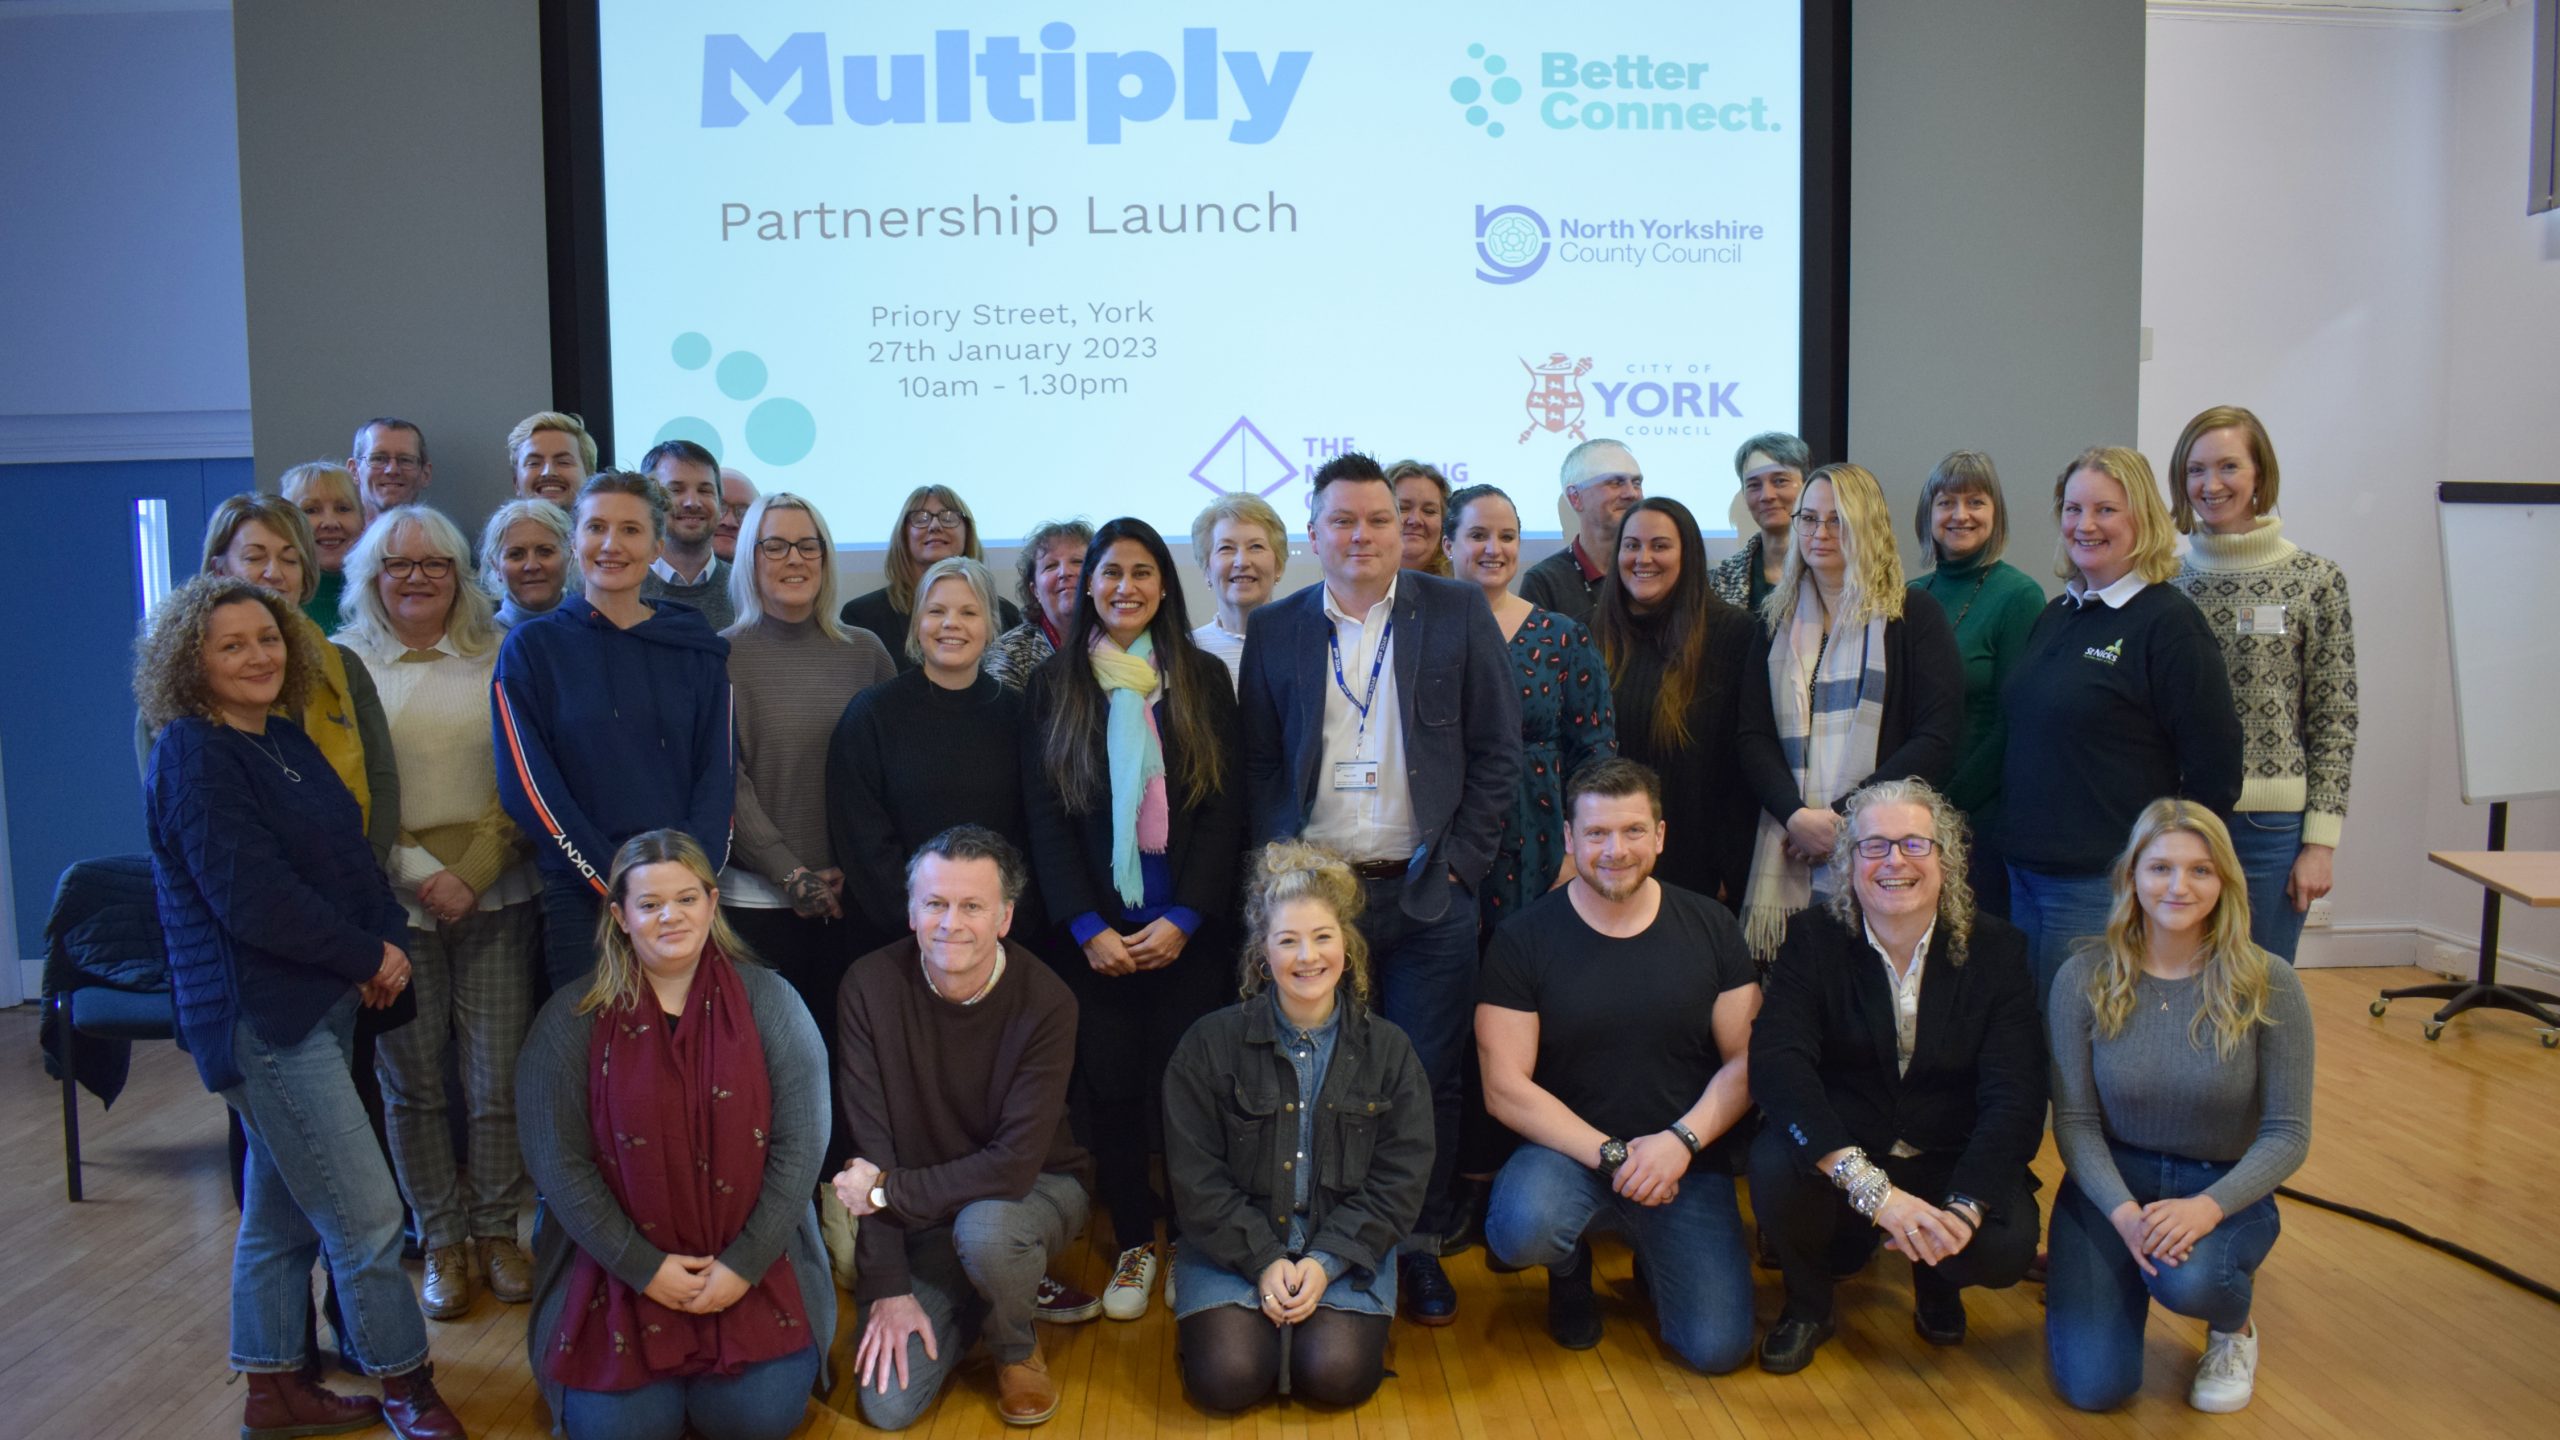 Launching our new Multiply Programme